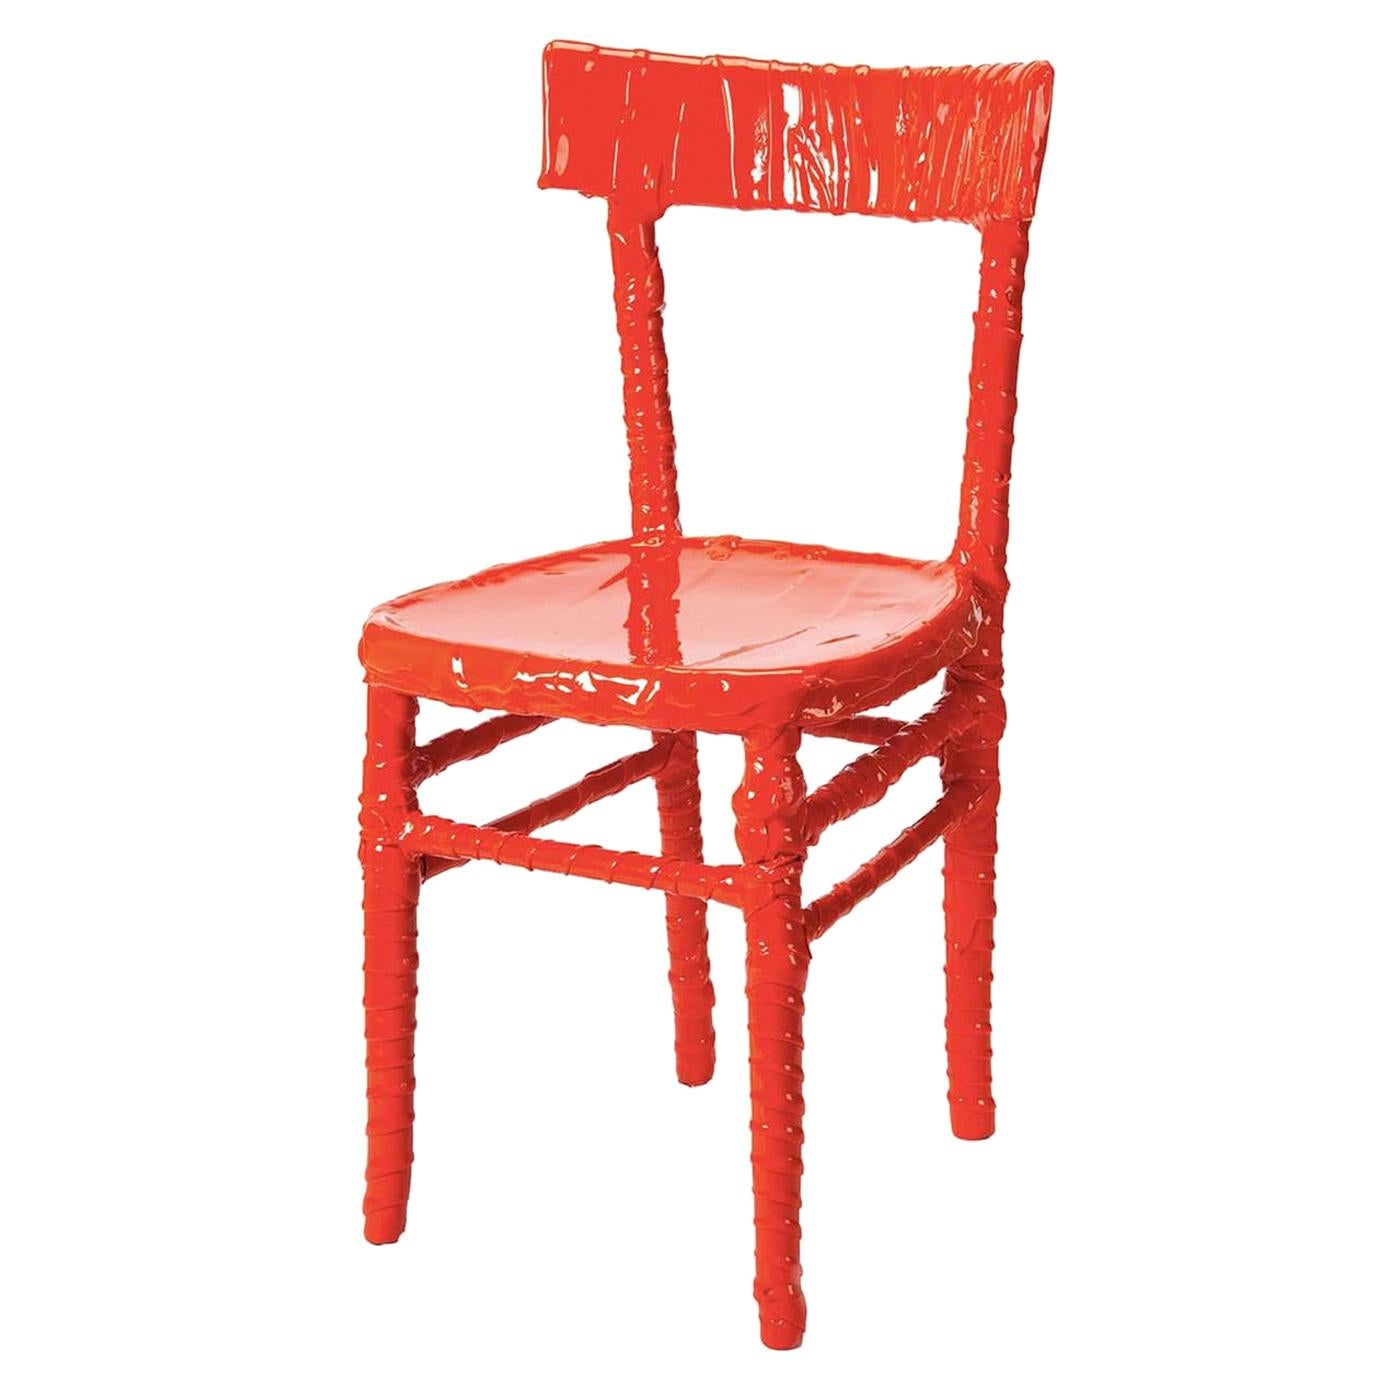 N. 14/20 One-Off Orange Resin Chair by Paola Navone